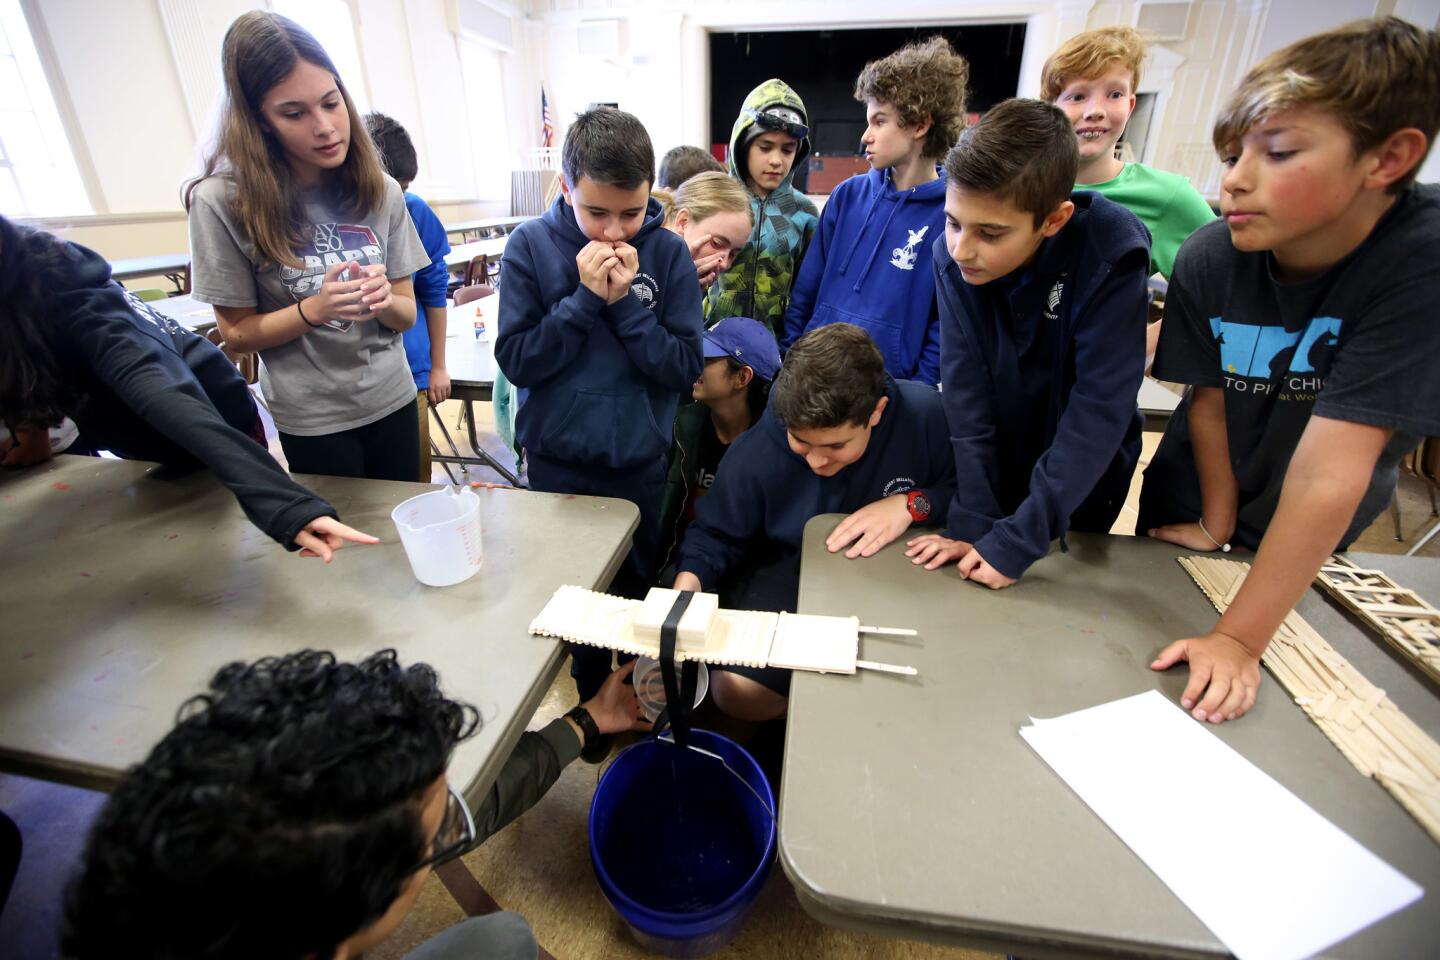 STEM World curriculum director Josue Hernandez helps hold the water container as members of Team Watchdogs test their bridge at the St. John Paul II STEM Academy Camp, at their location in Burbank on Tuesday, May 28, 2019. The bridge was made with 150 wooden craft sticks. Team Watchdogs came in third place.